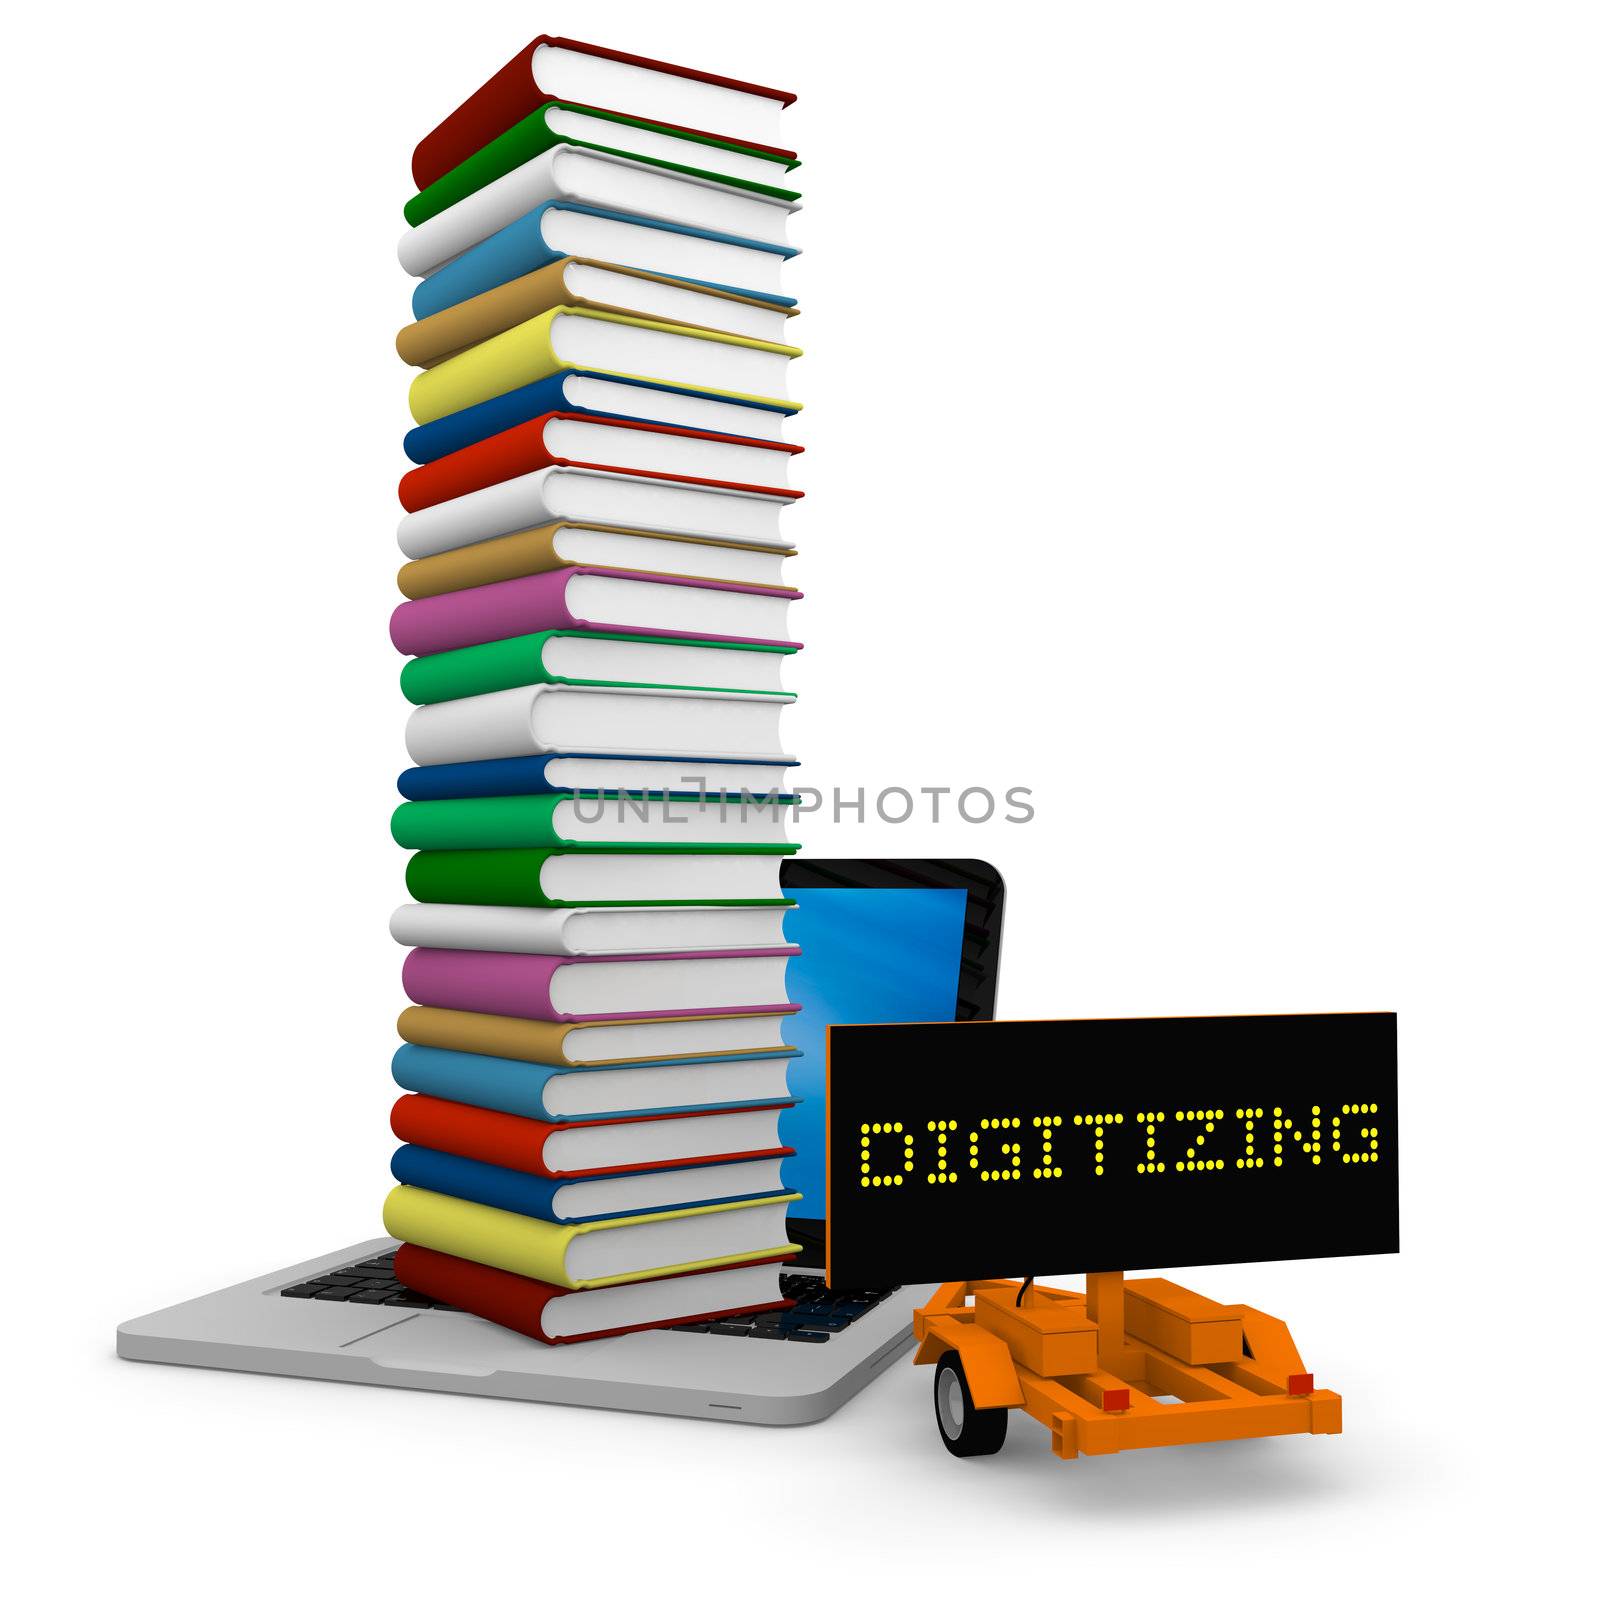 Tall pile of colourful books on the top of a laptop and a cart with sign DIGITIZING